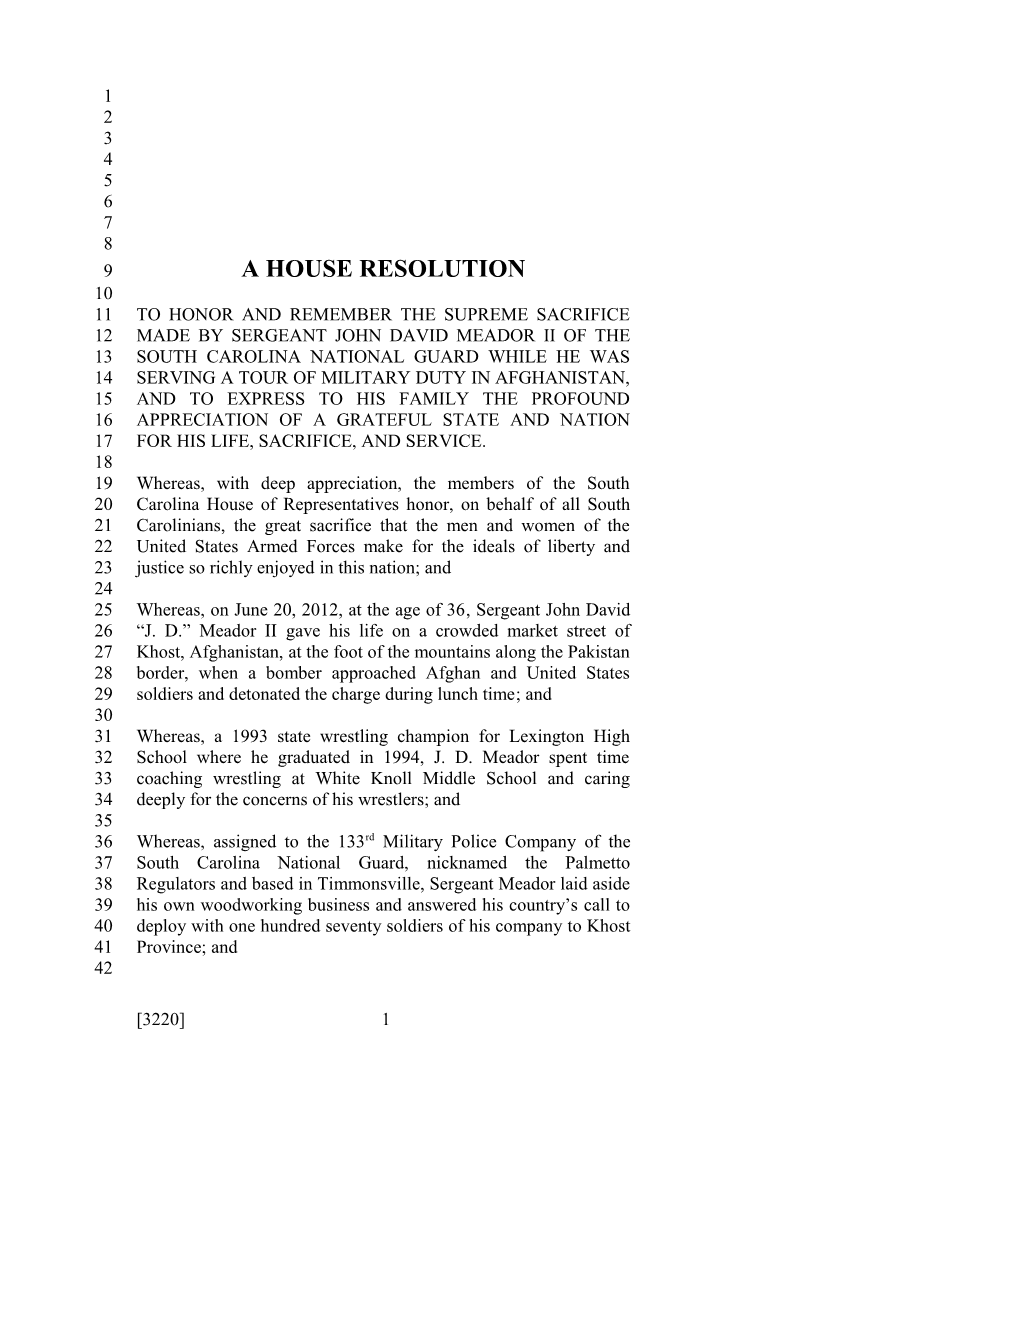 A House Resolution s13